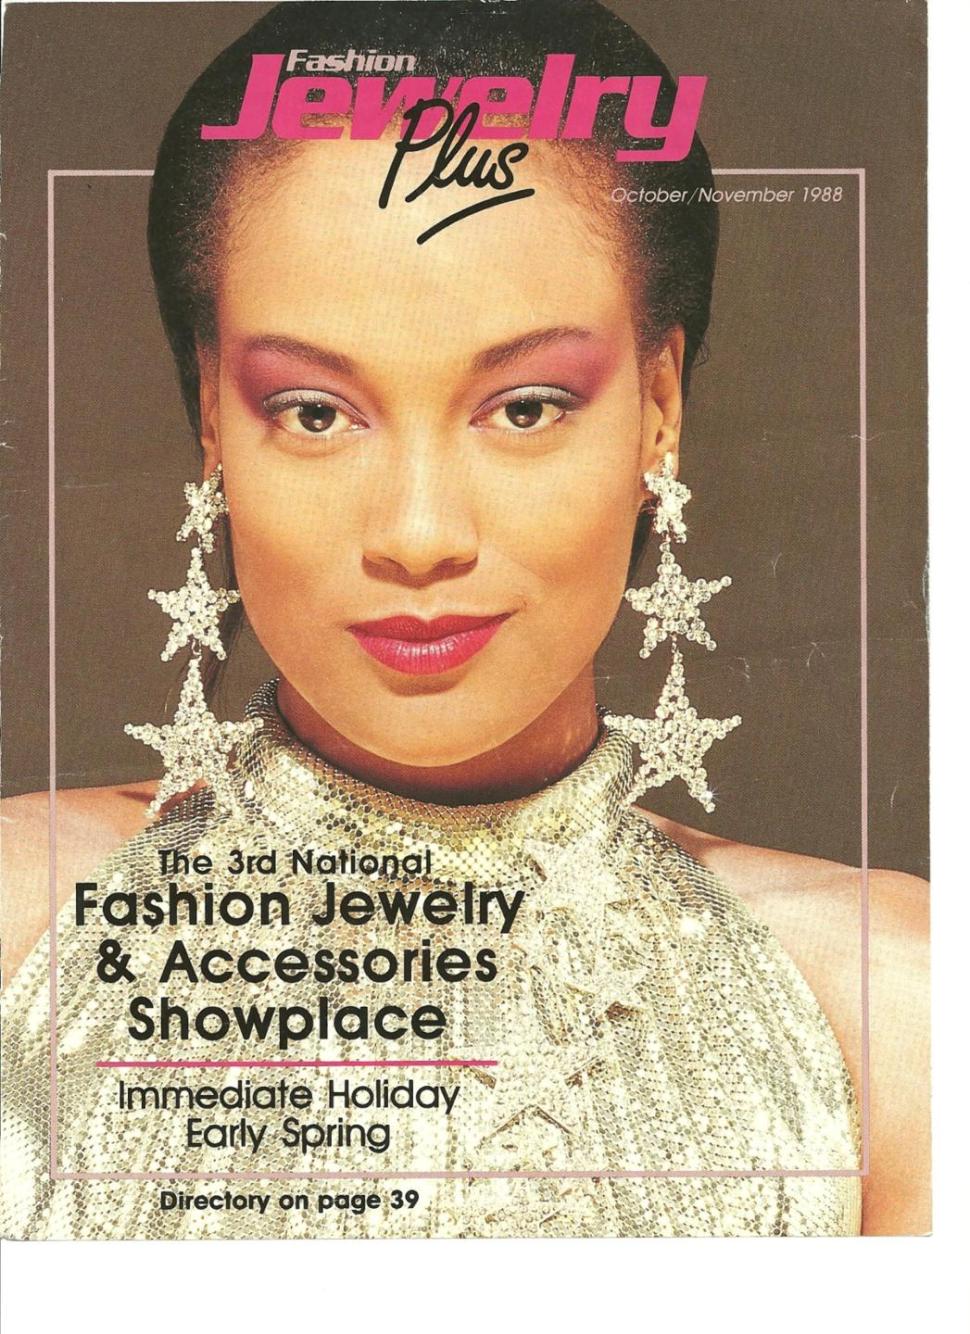 Allison is seen on the cover of a jewelry catalogue from 1988.